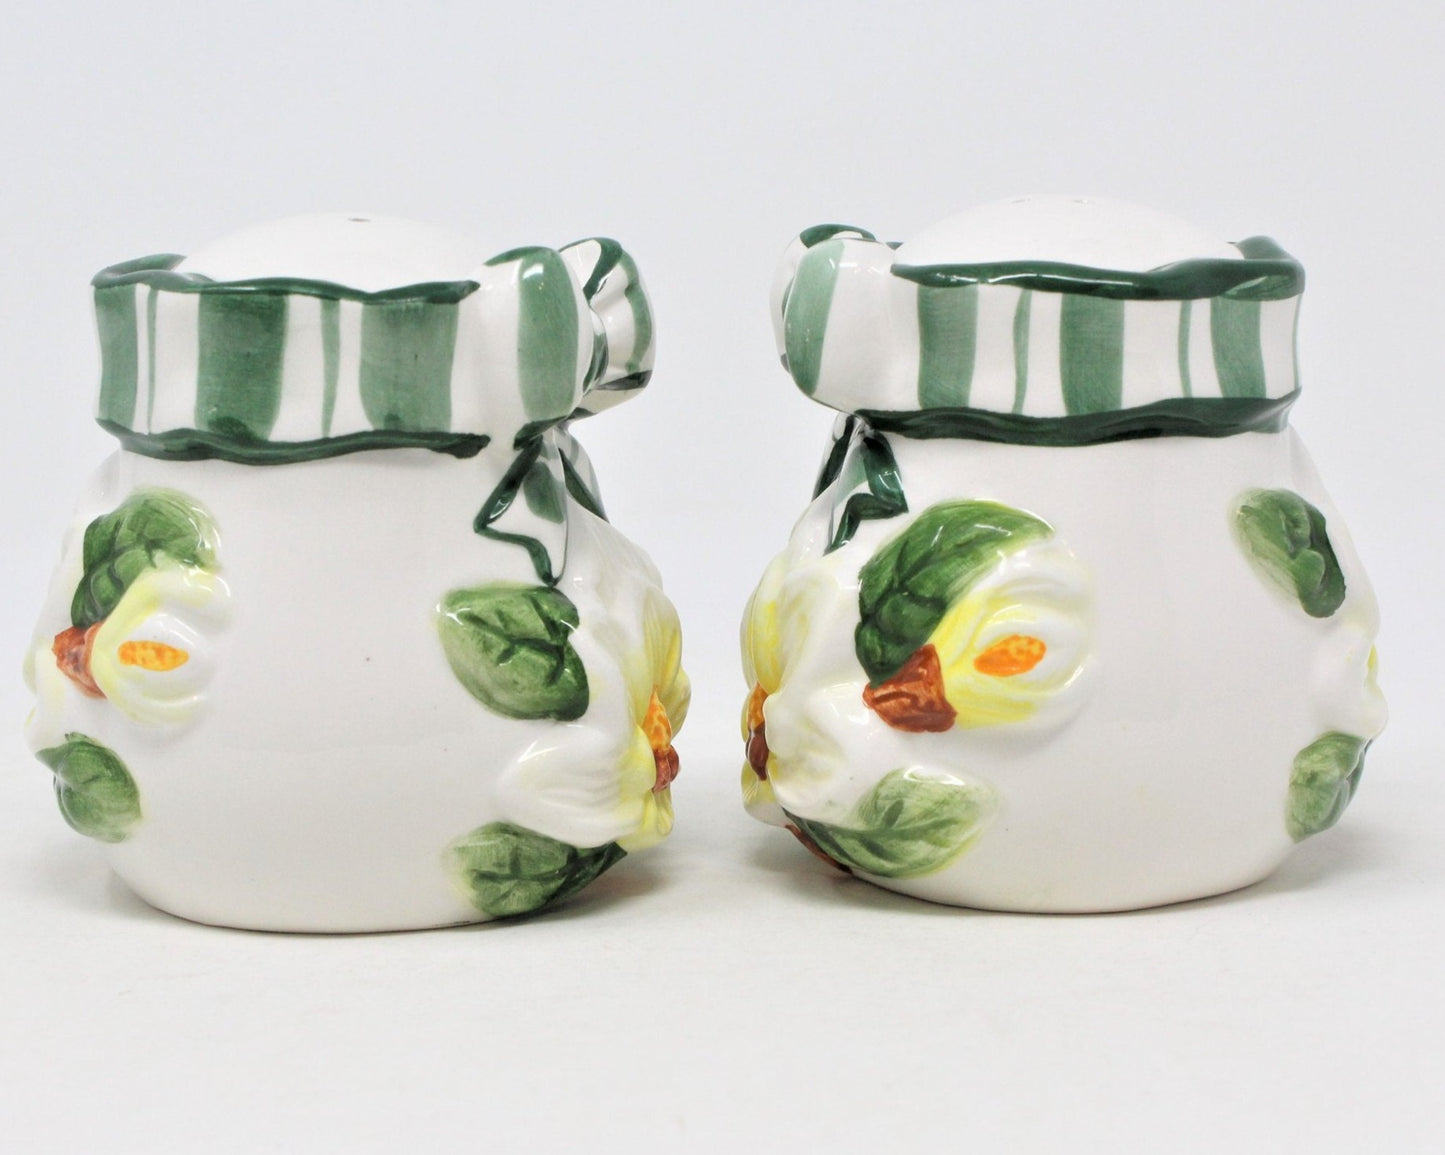 Salt and Pepper Shakers, Young's China, Magnolia and Bows, Ceramic 1996, SOLD